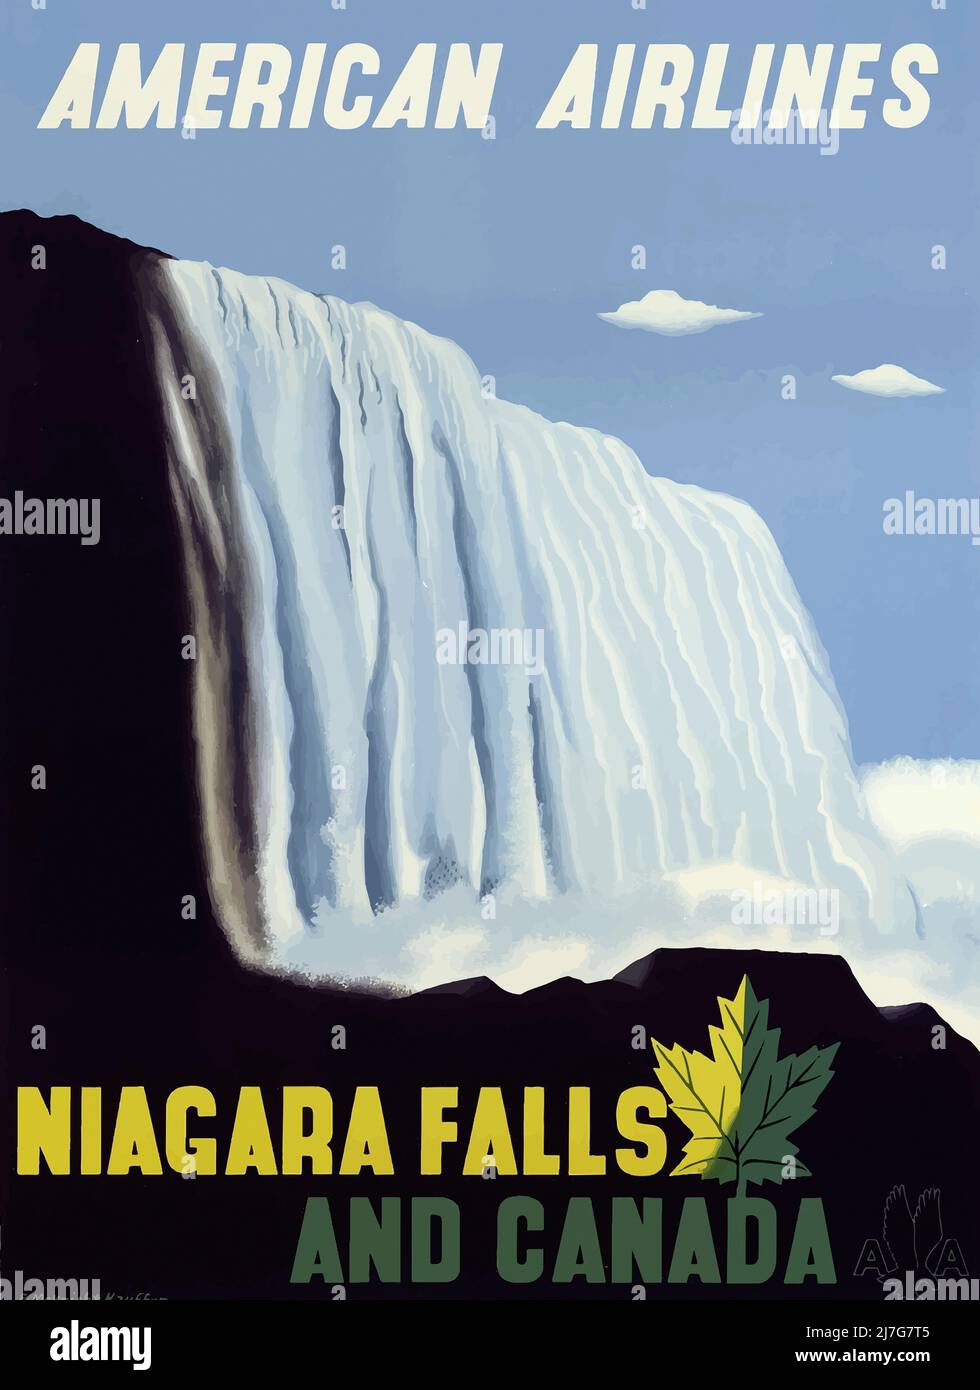 Vintage 1940s Travel Poster - Niagara Falls and Canada with American Airlines Stock Photo